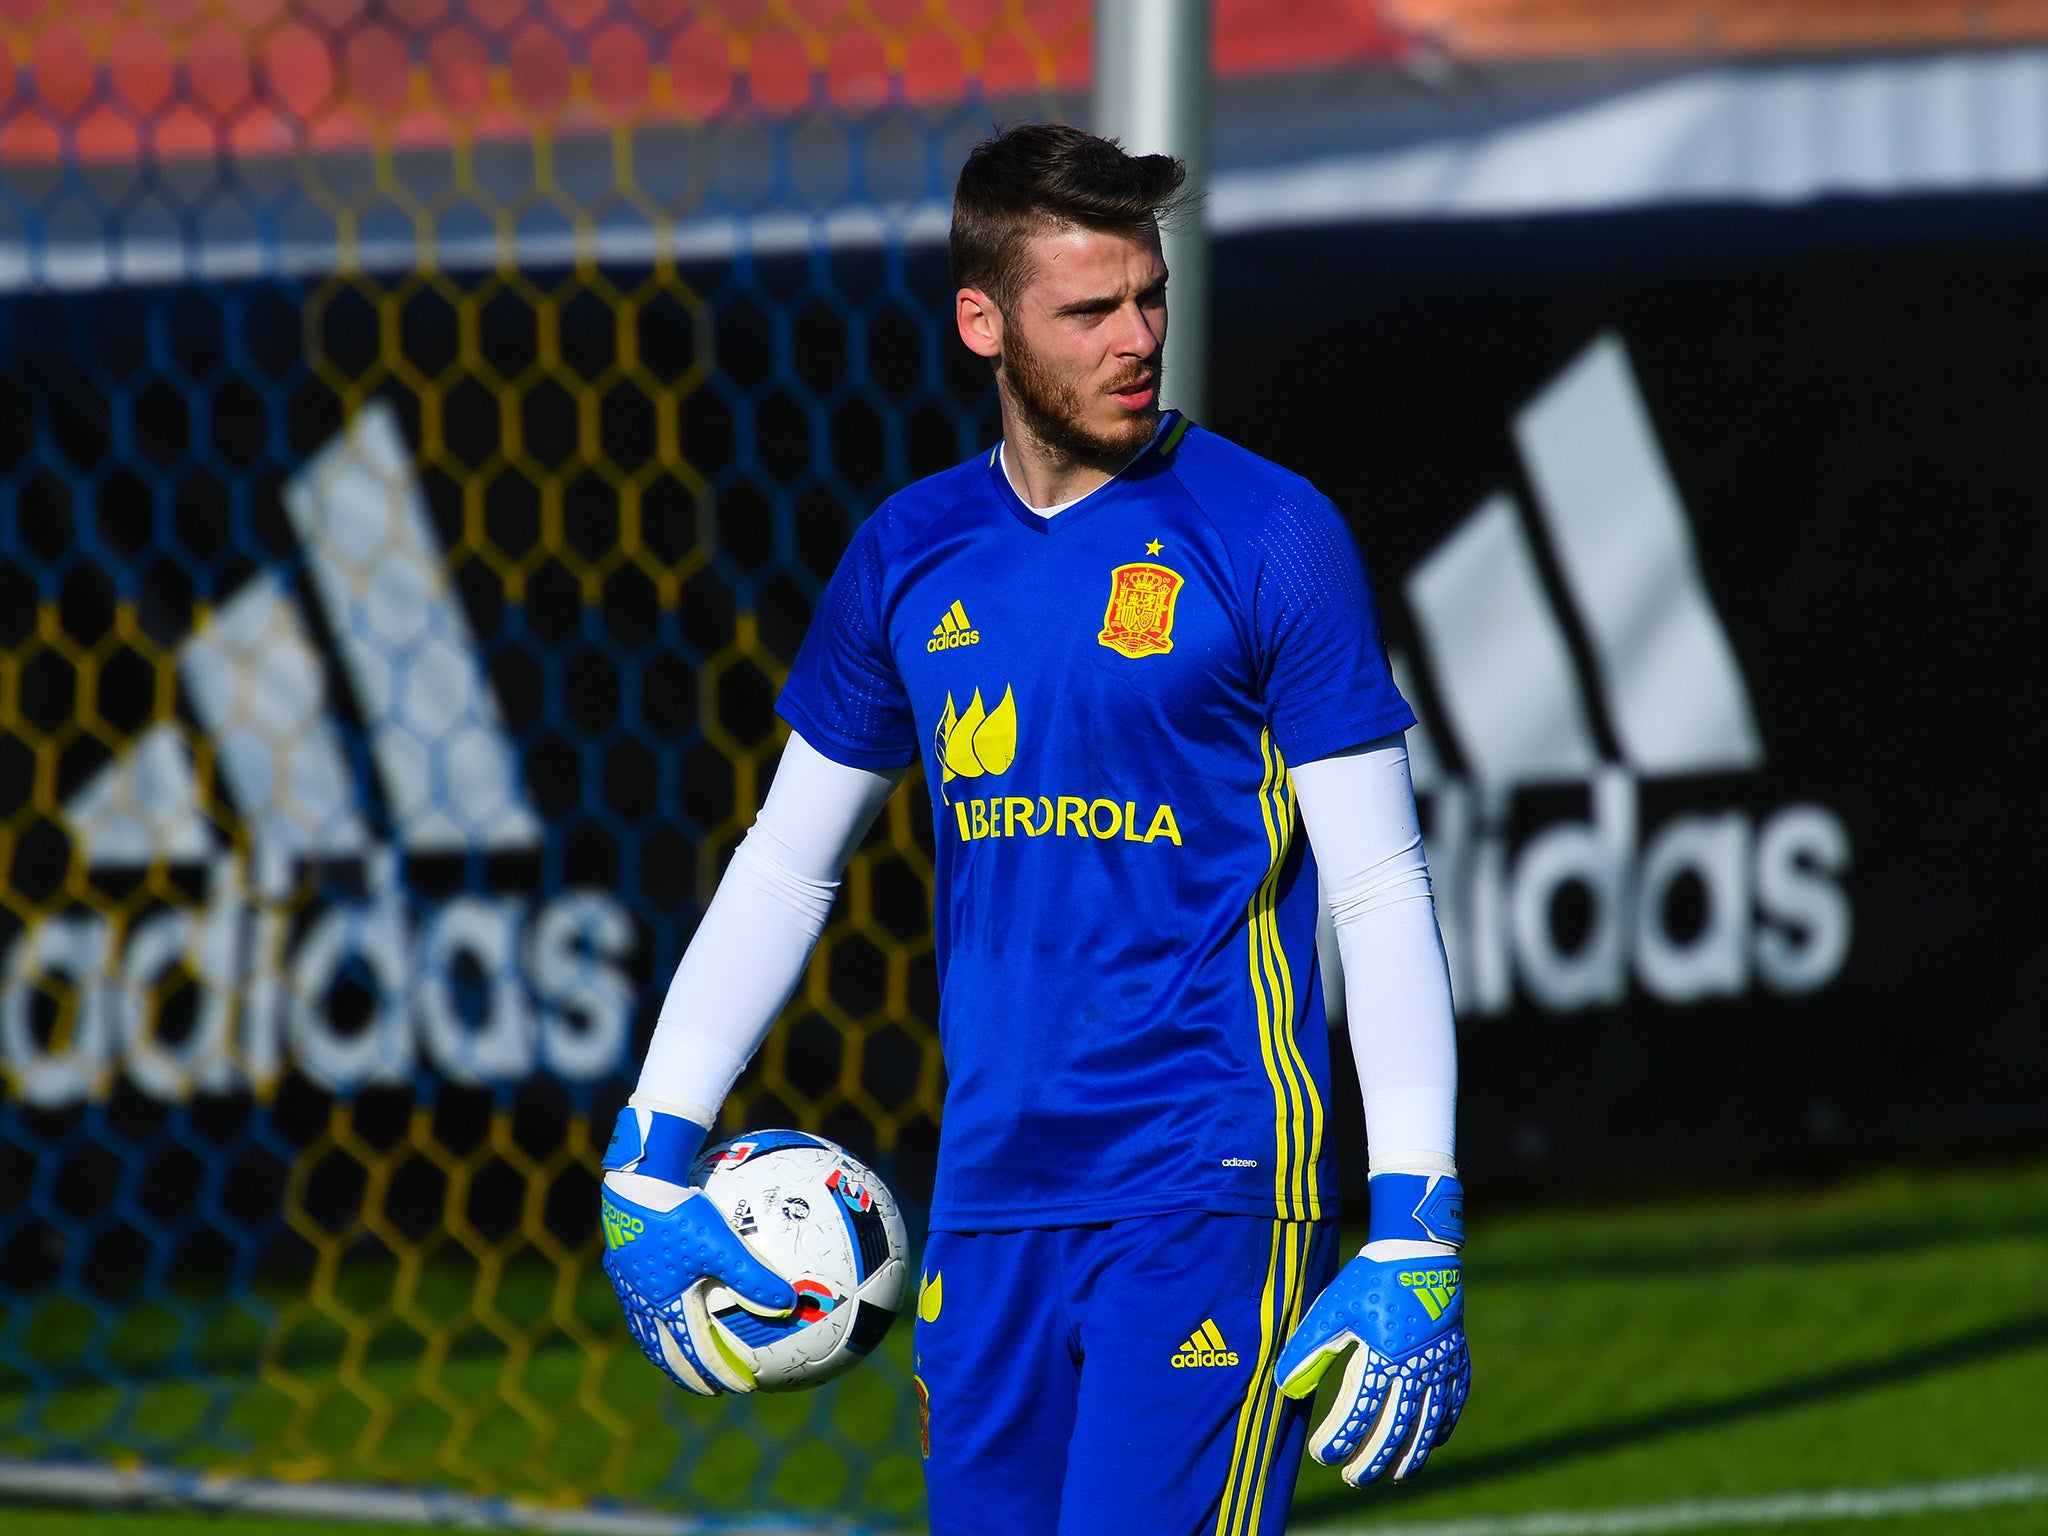 De Gea has denied all allegations and labelled them 'a lie'